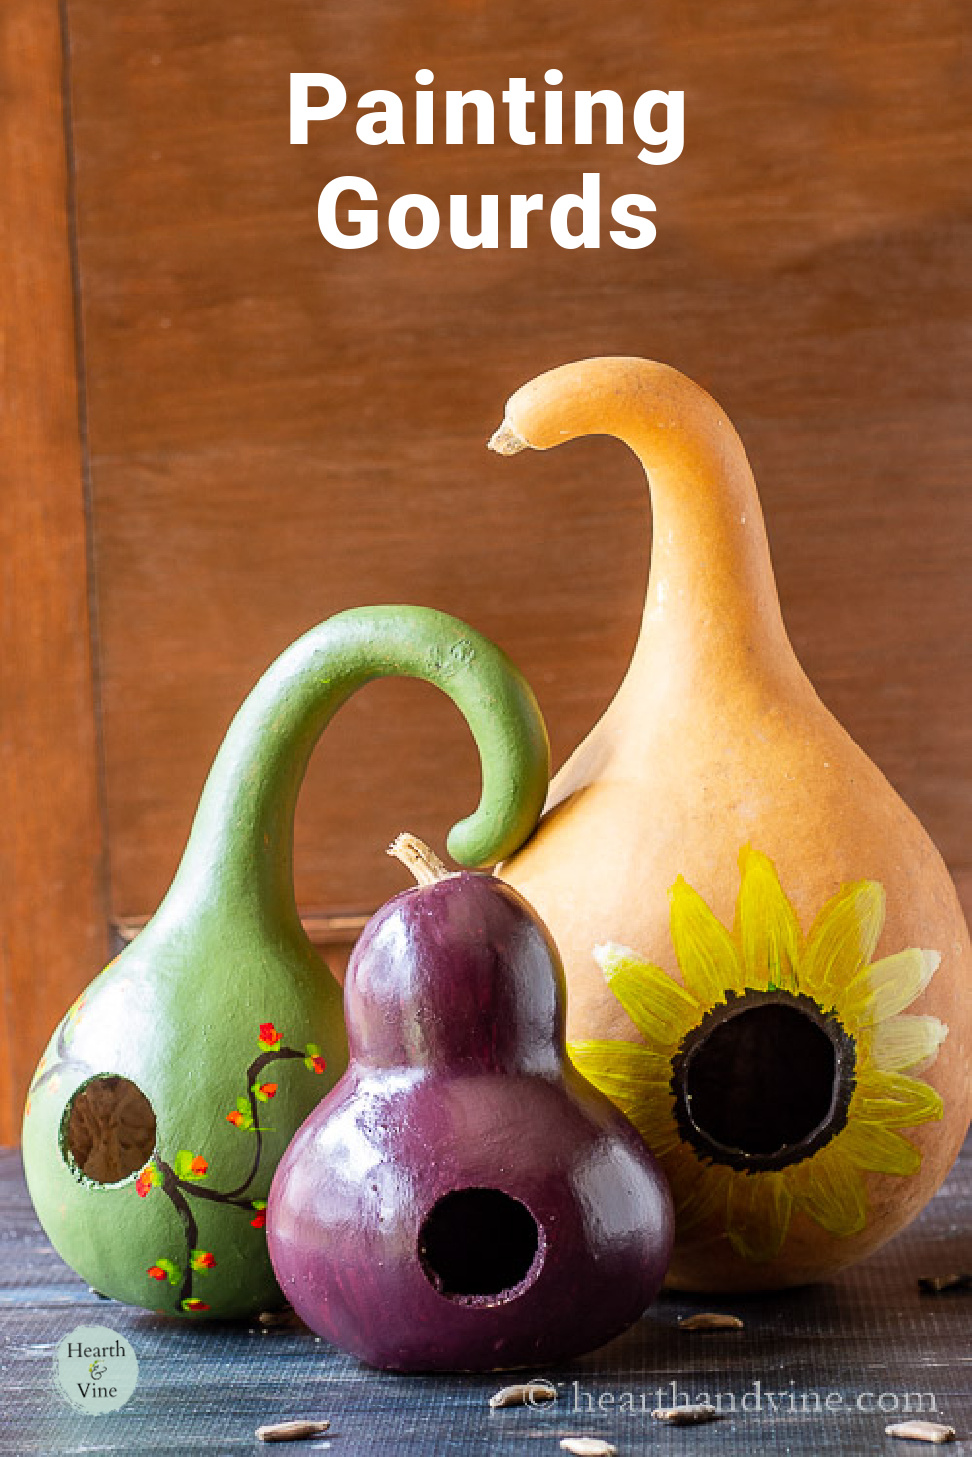 Three painted birdhouse gourds in green, yellow and deep purple colors.